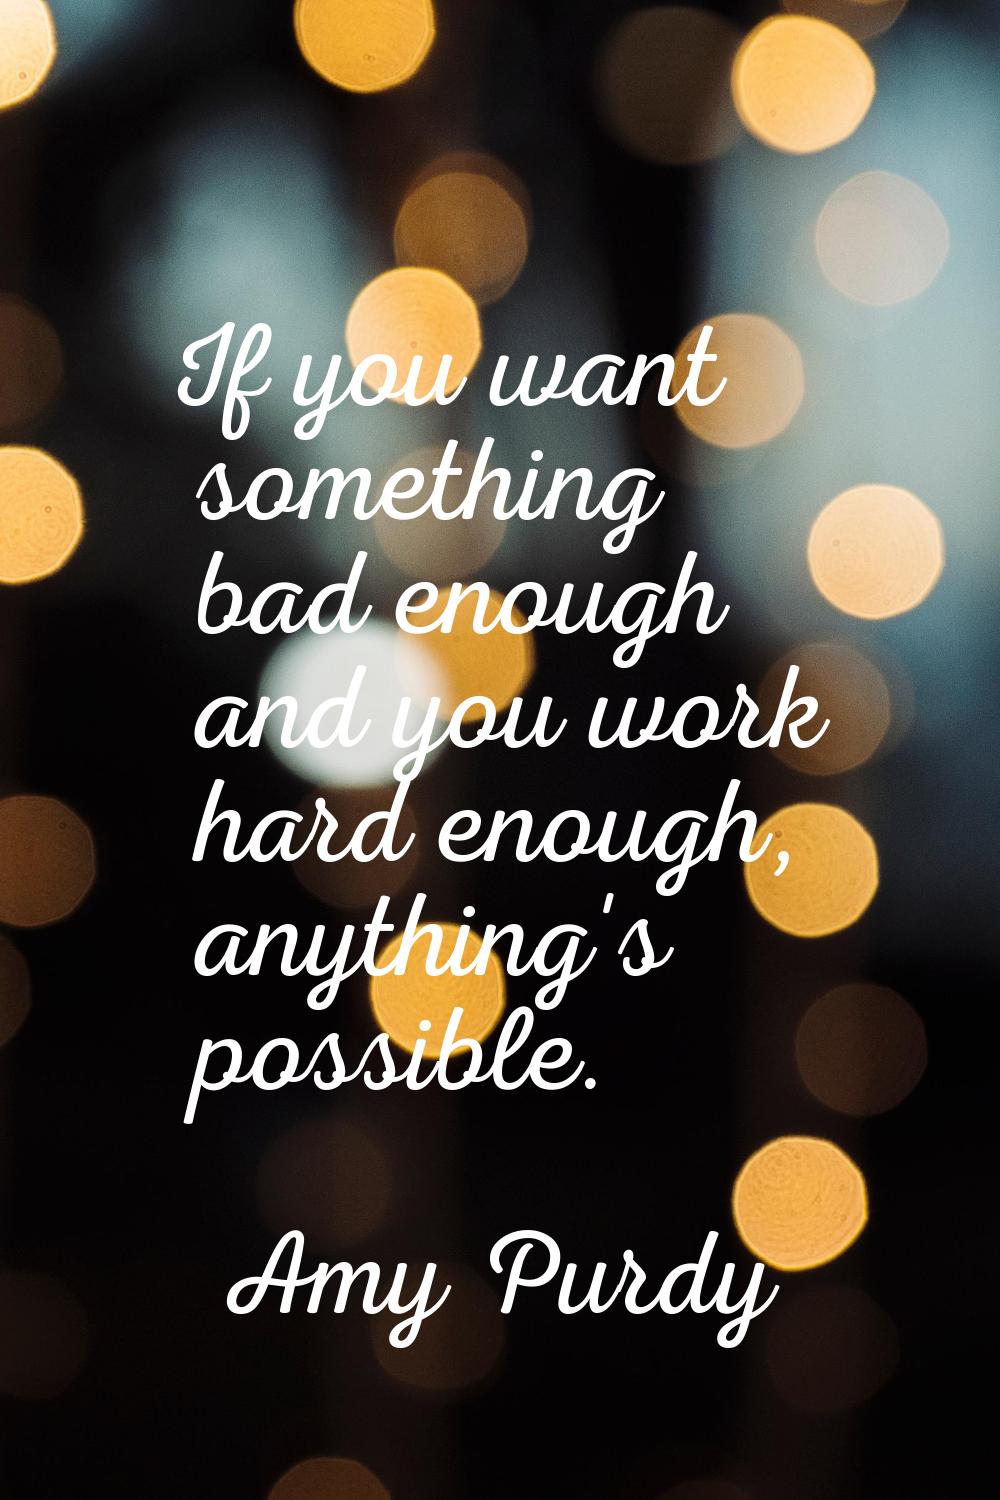 If you want something bad enough and you work hard enough, anything's possible.